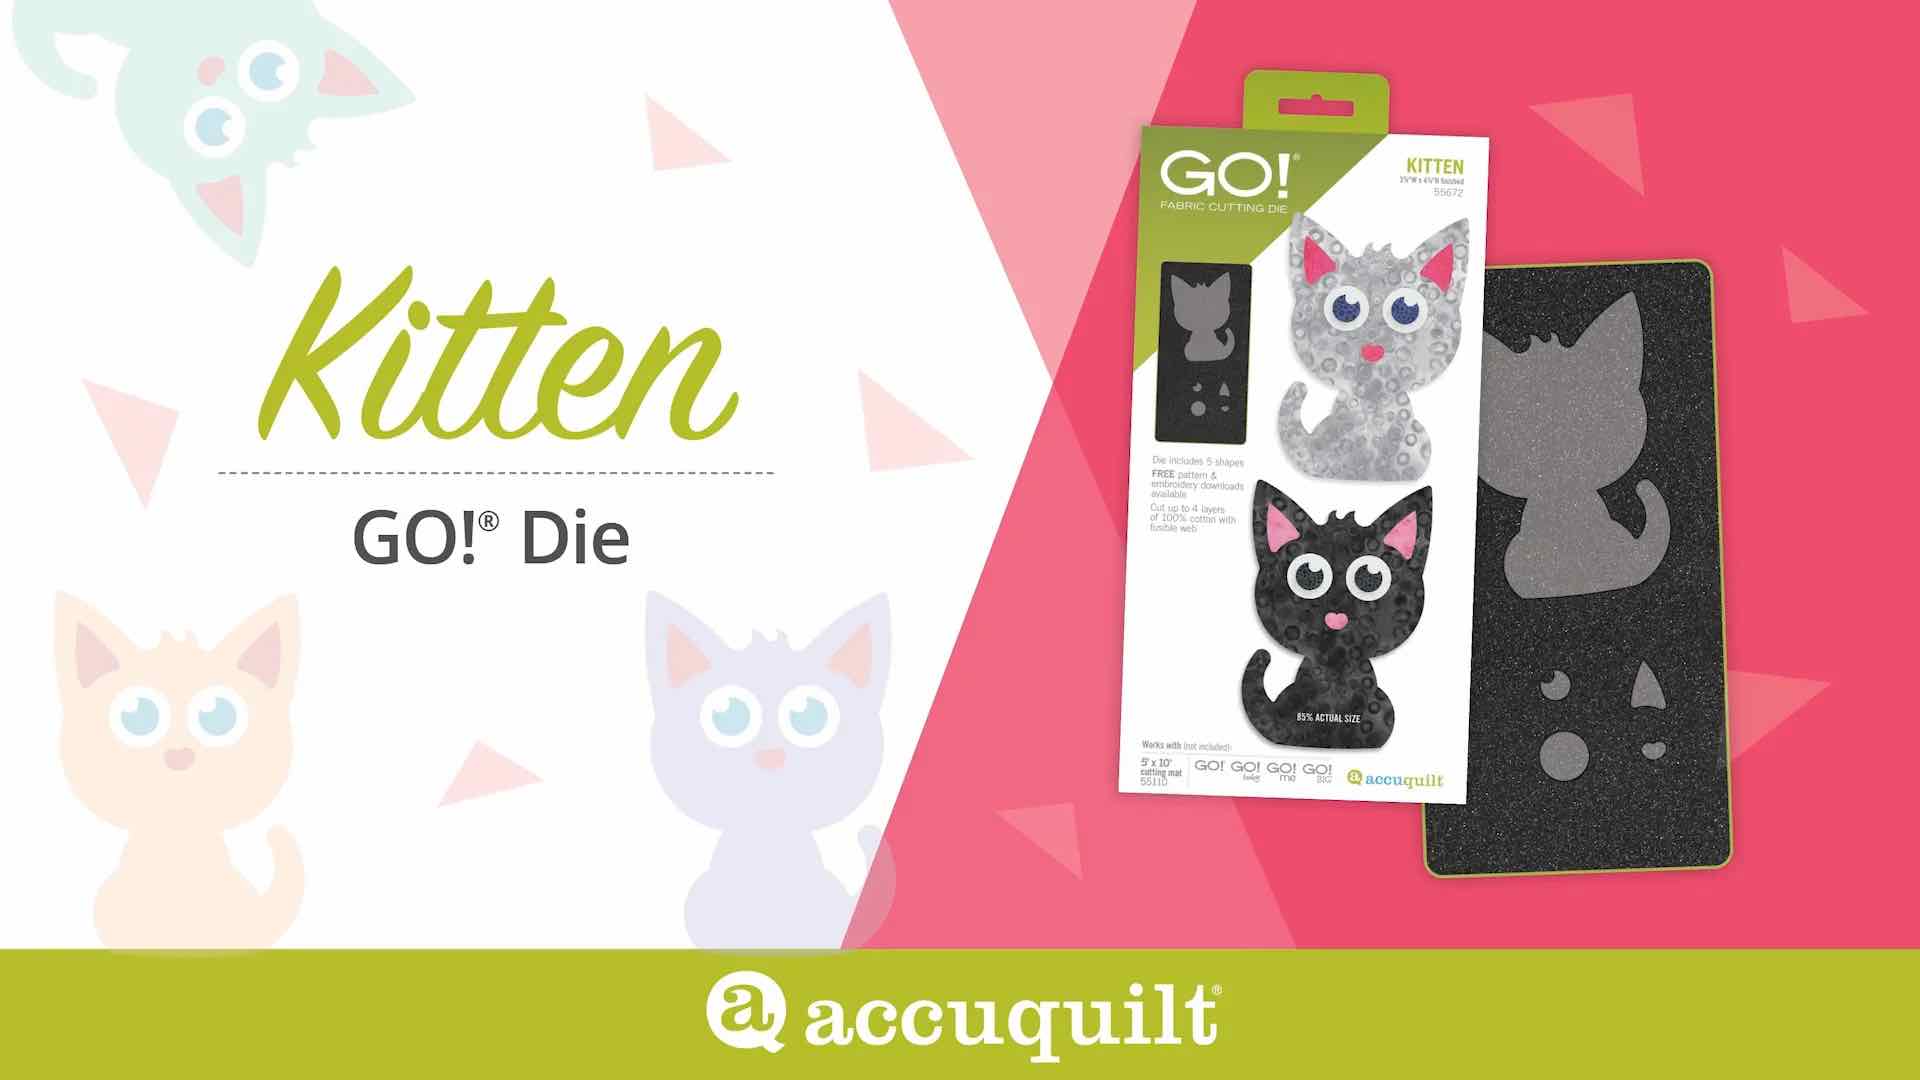 Add a Cuddly Touch of Whimsy with the New GO! Kitten Die